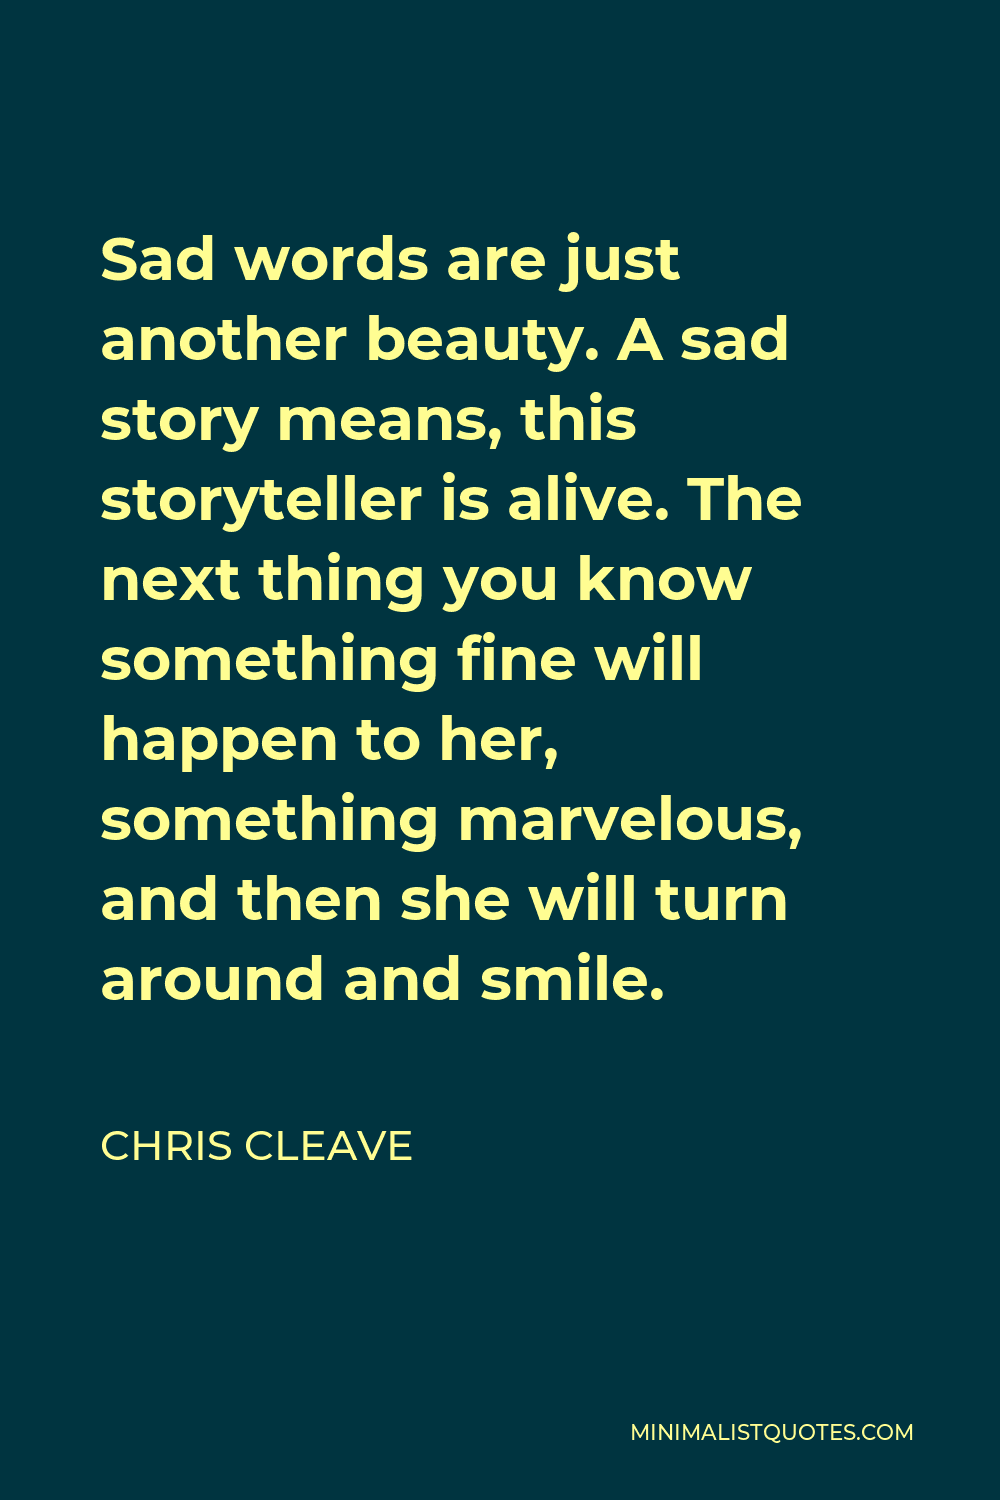 Chris Cleave Quote: Sad words are just another beauty. A sad story ...